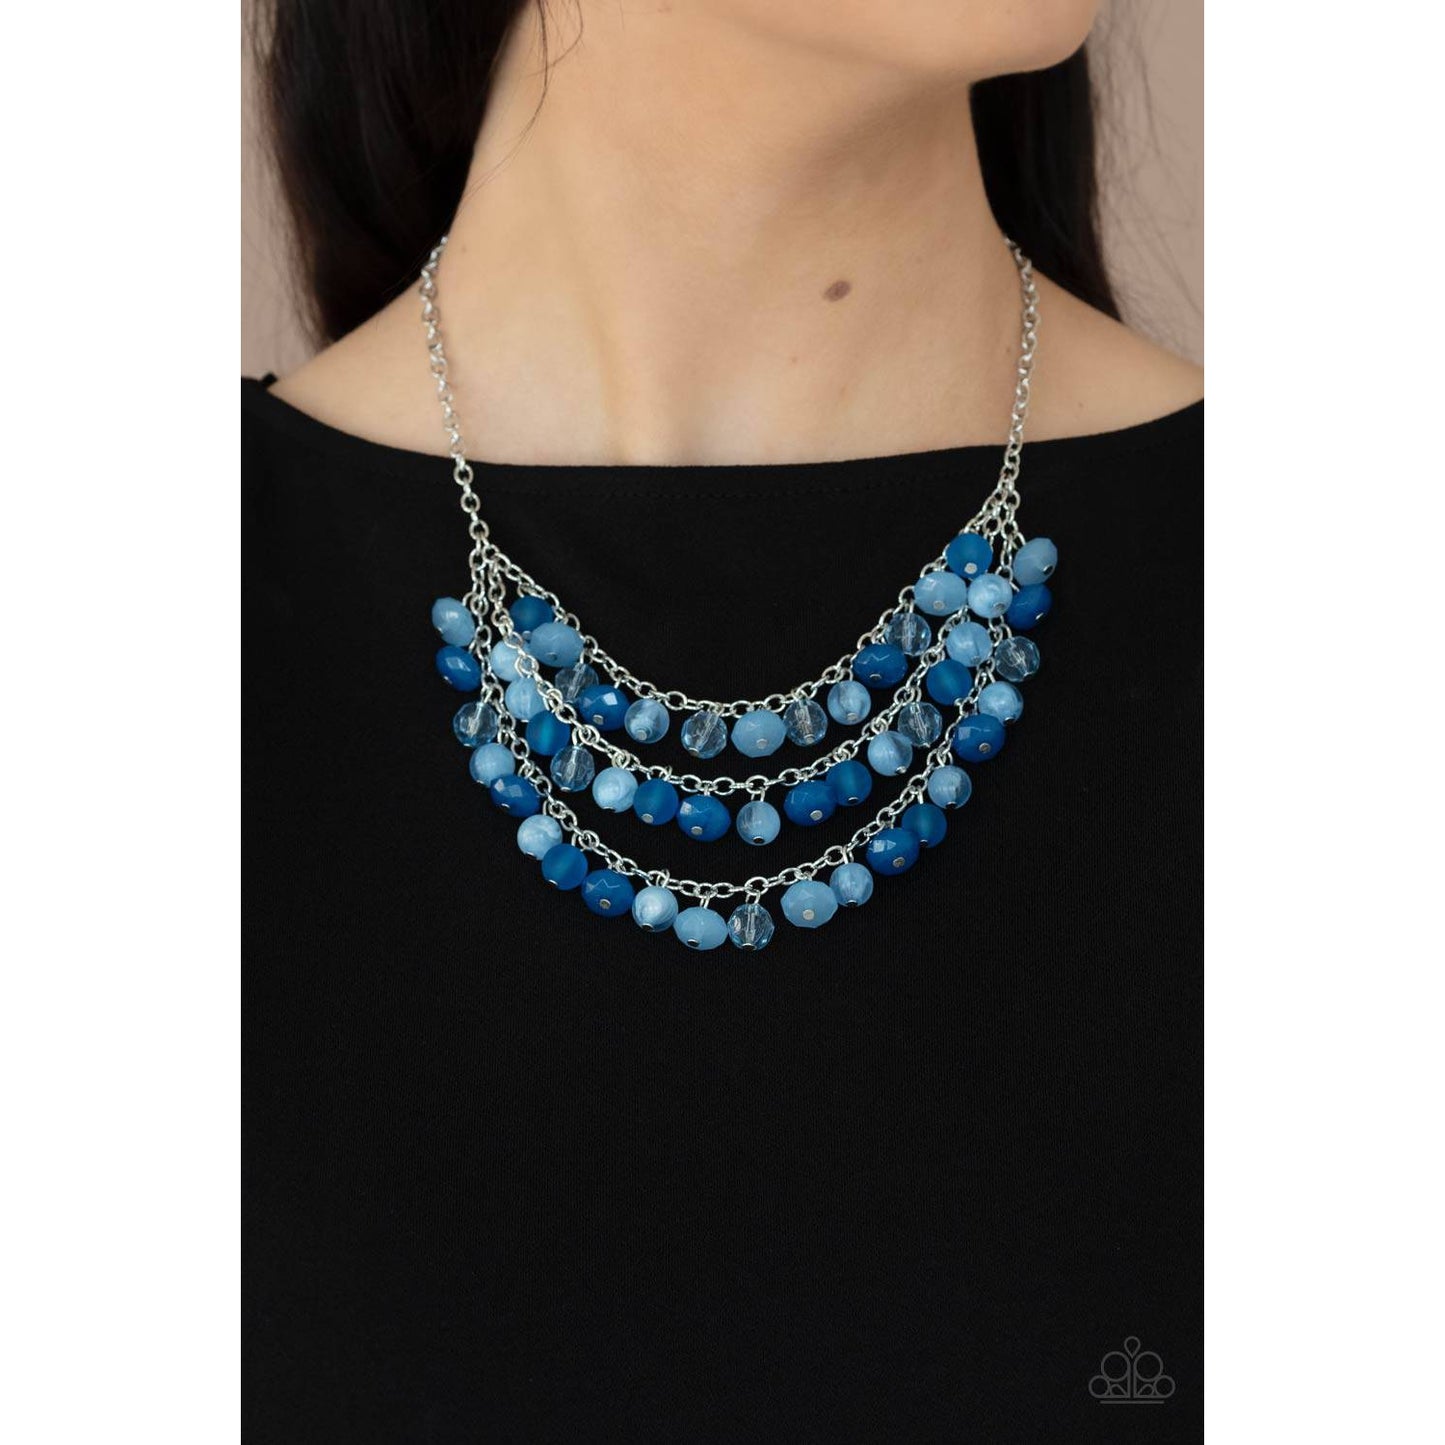 Fairytale Timelessness - Blue Crystal-like Beads Necklace - Paparazzi Accessories - GlaMarous Titi Jewels